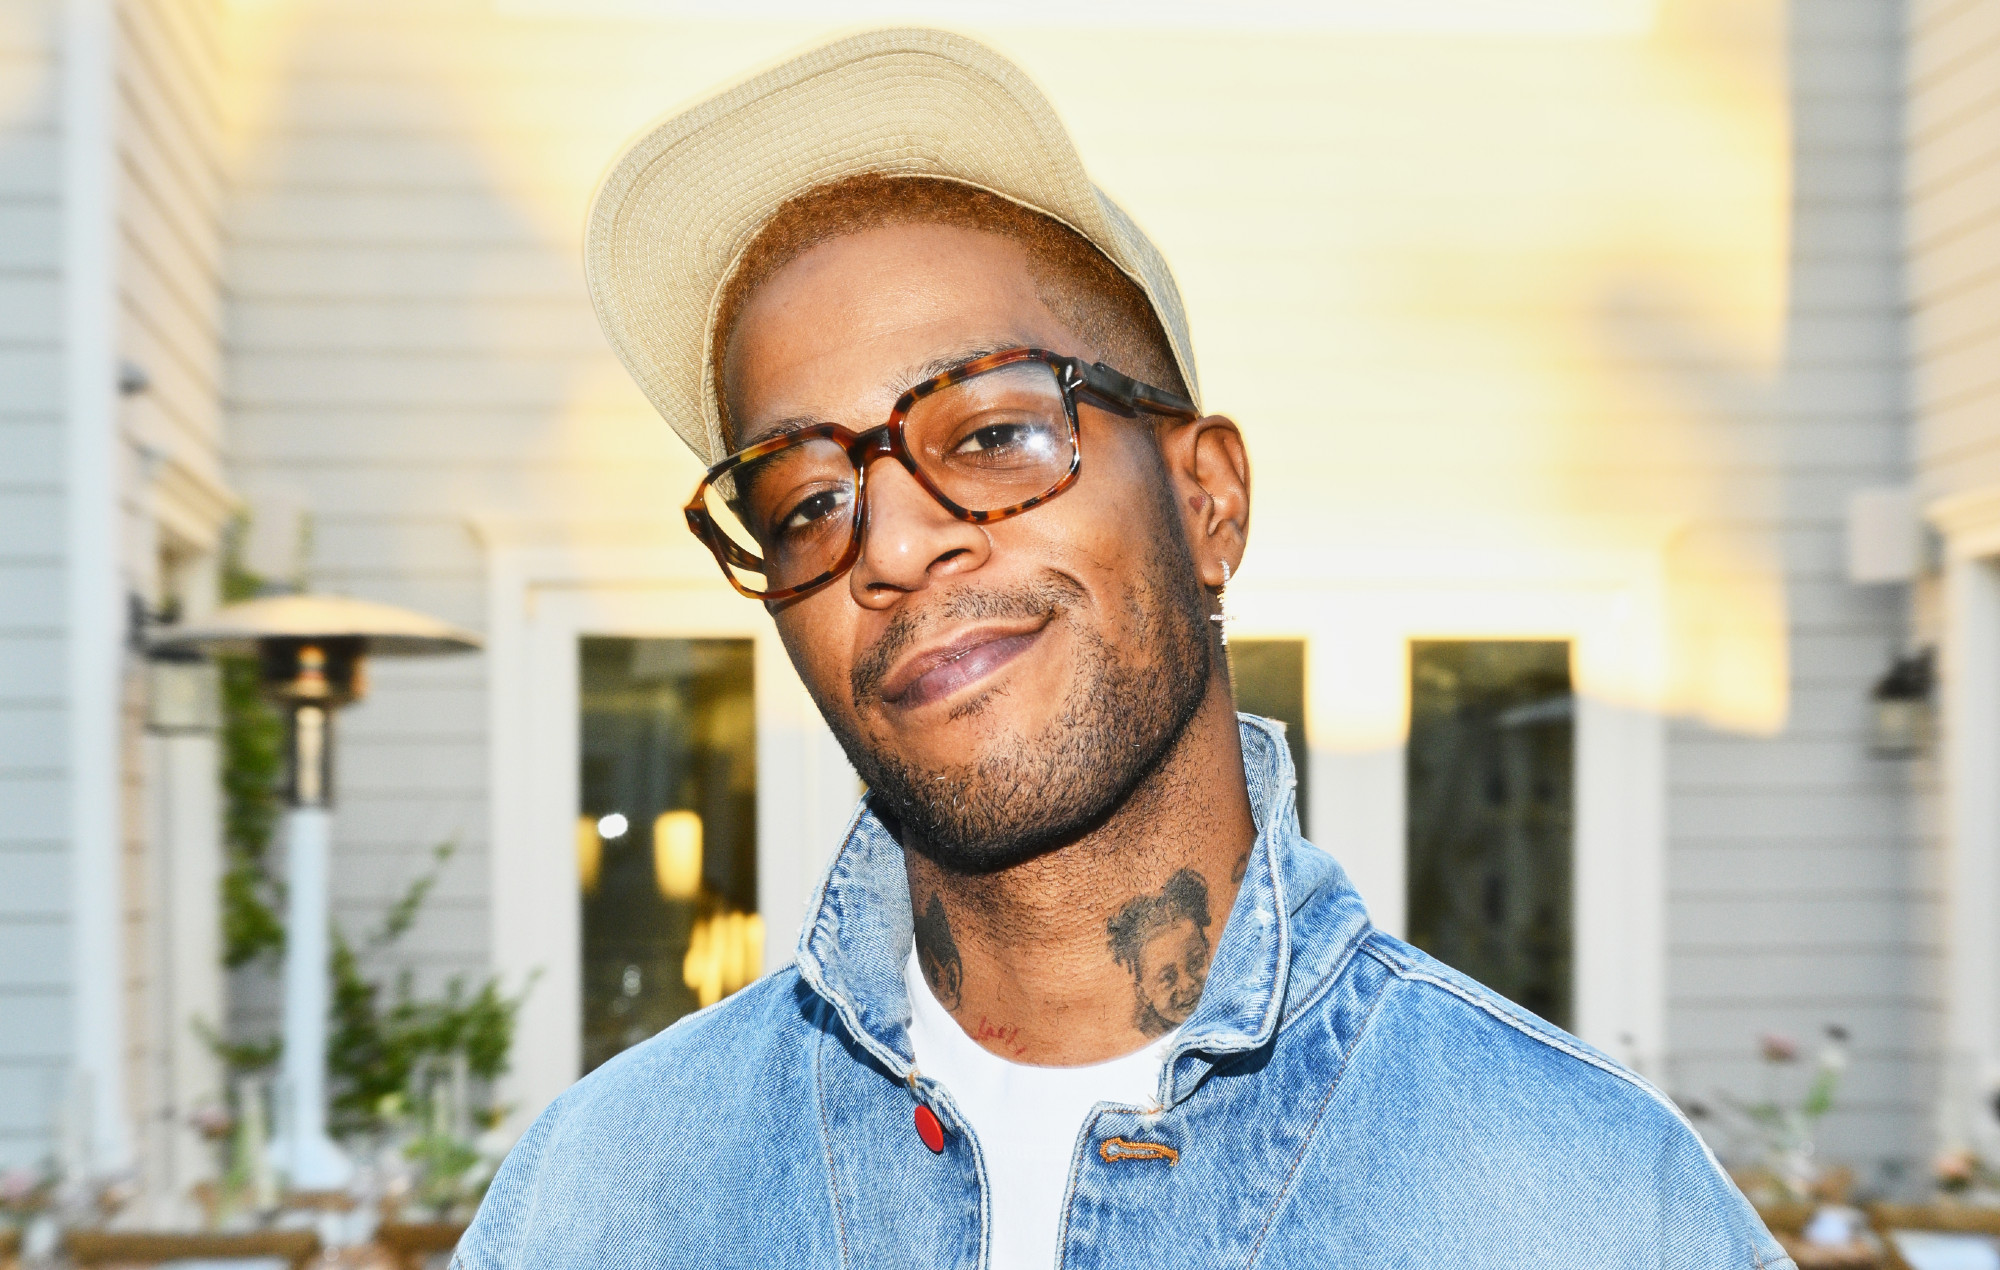 Kid Cudi at the TheRetaility.com x September Letters dinner. Photo credit: Michael Buckner/Variety via Getty Images